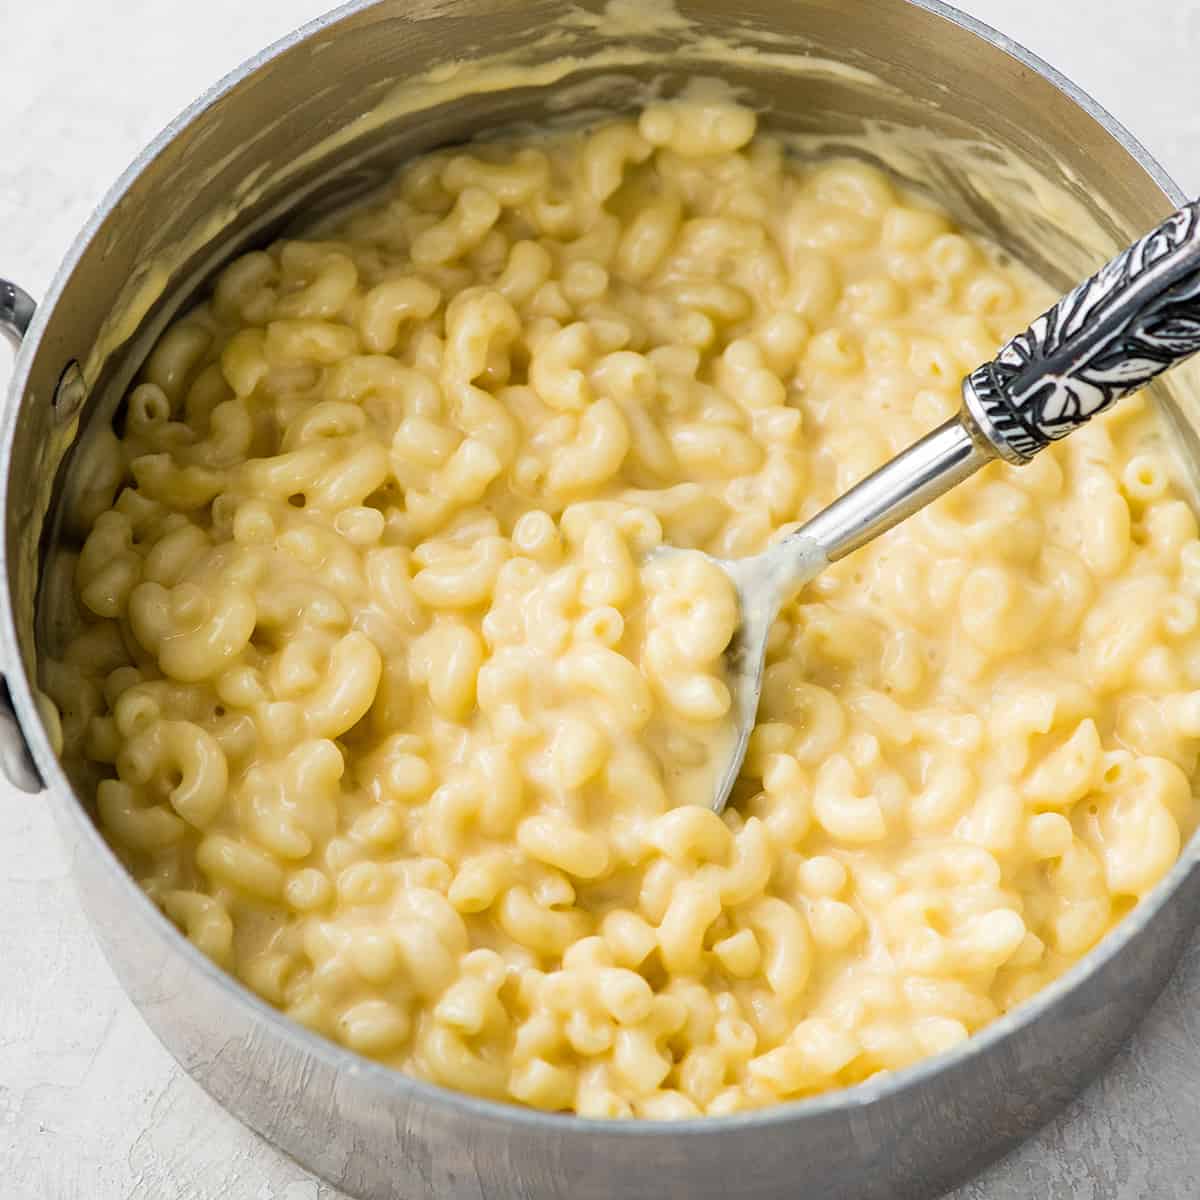 a spoon taking a scoop of homemade mac and cheese out of a saucepan